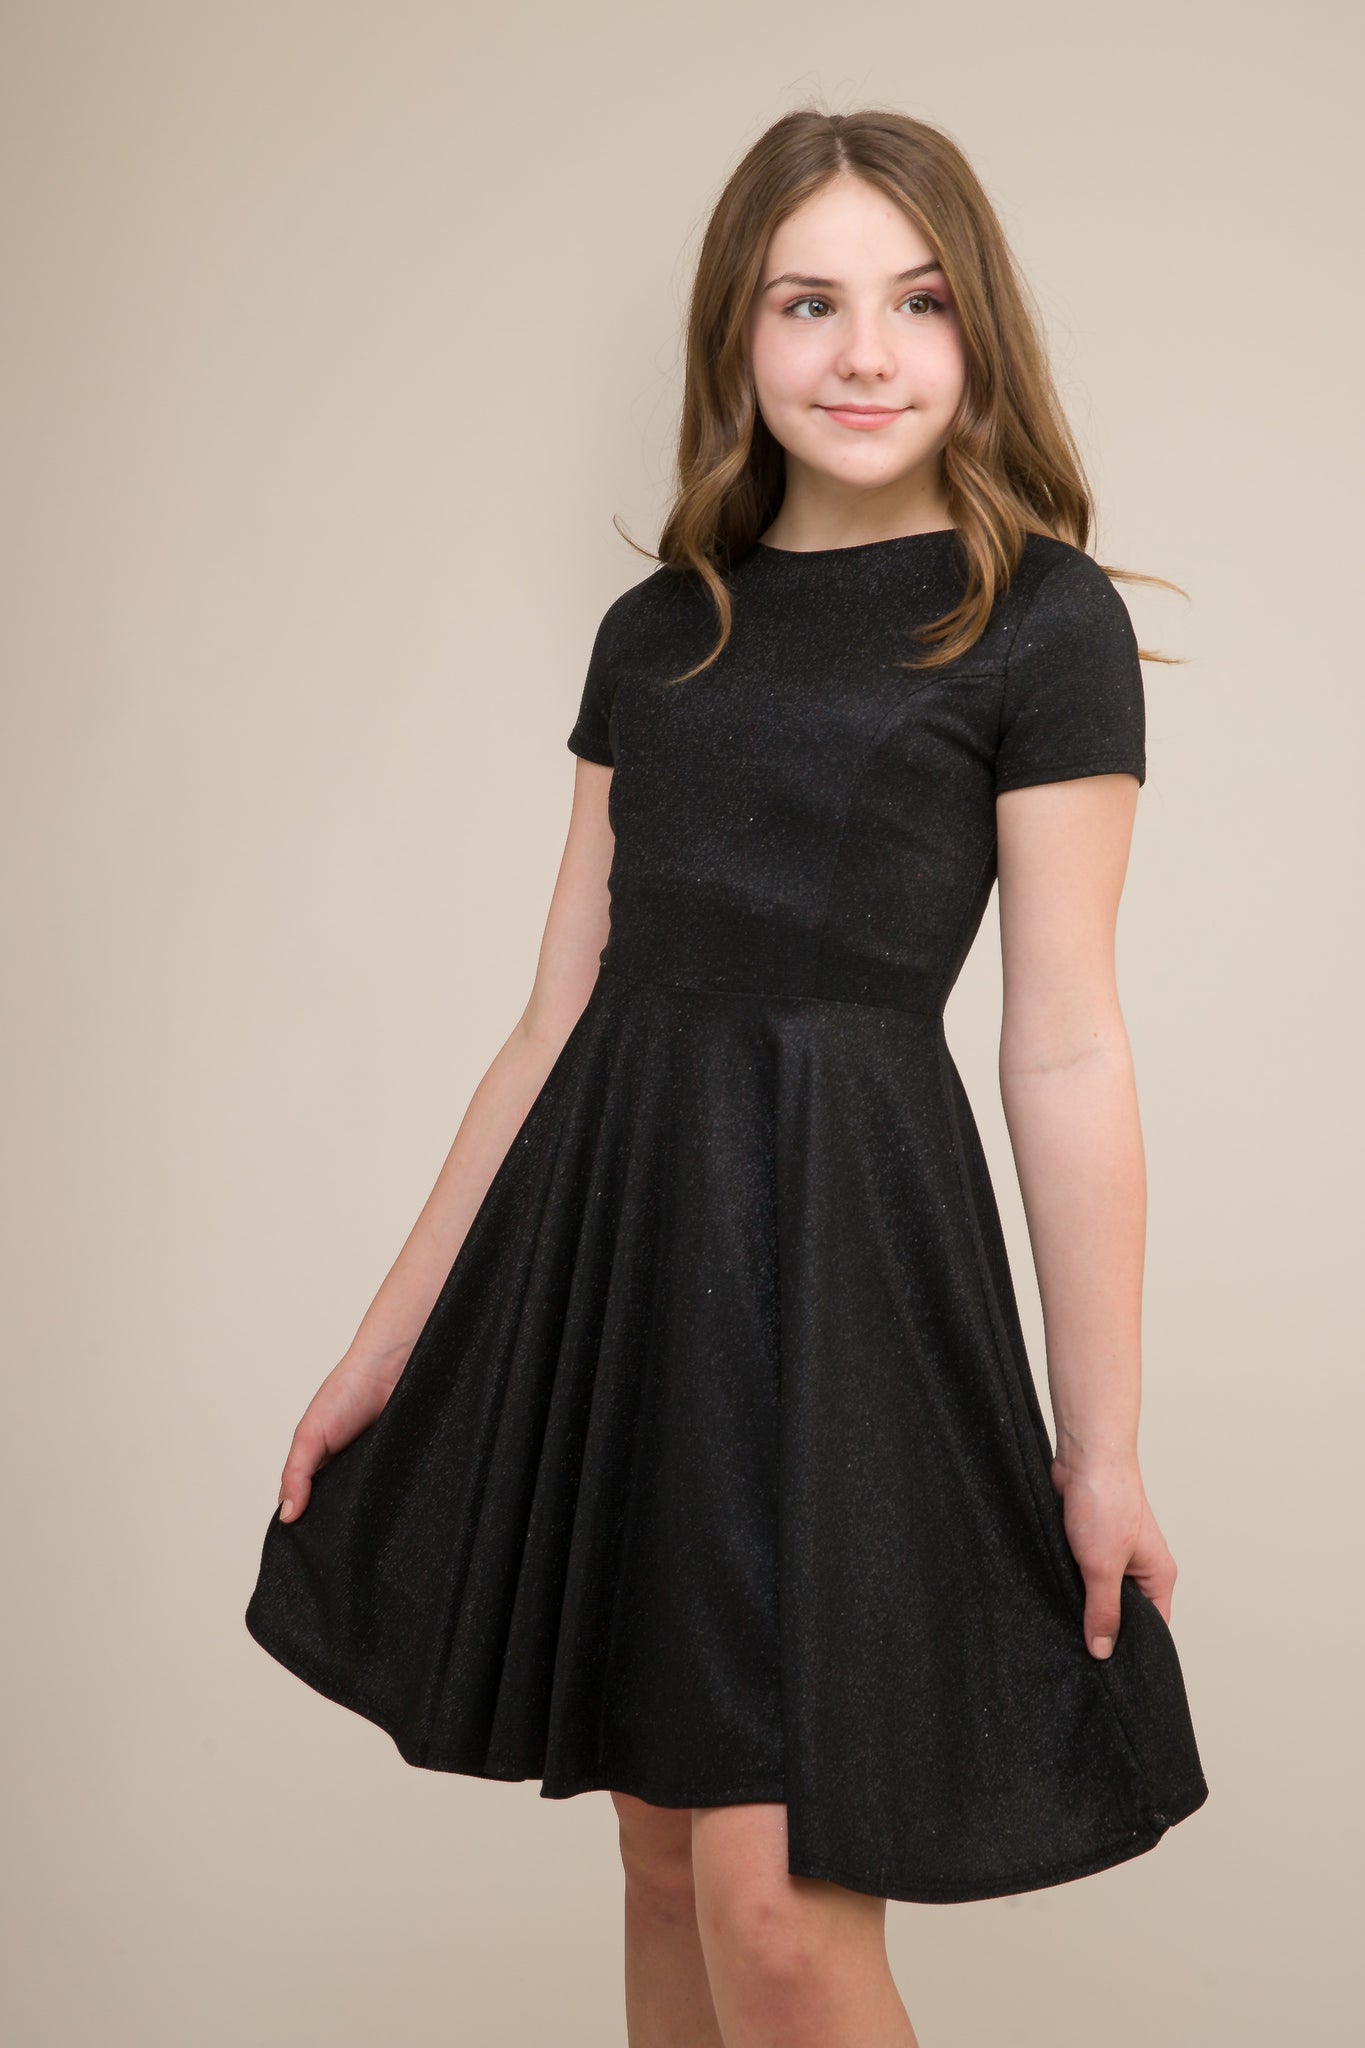 This is an all over black stretch glitter dress made with soft lining. It's non-scratch fabric is a perfect dress that hits right above the knee and has a lower v-back detailing.